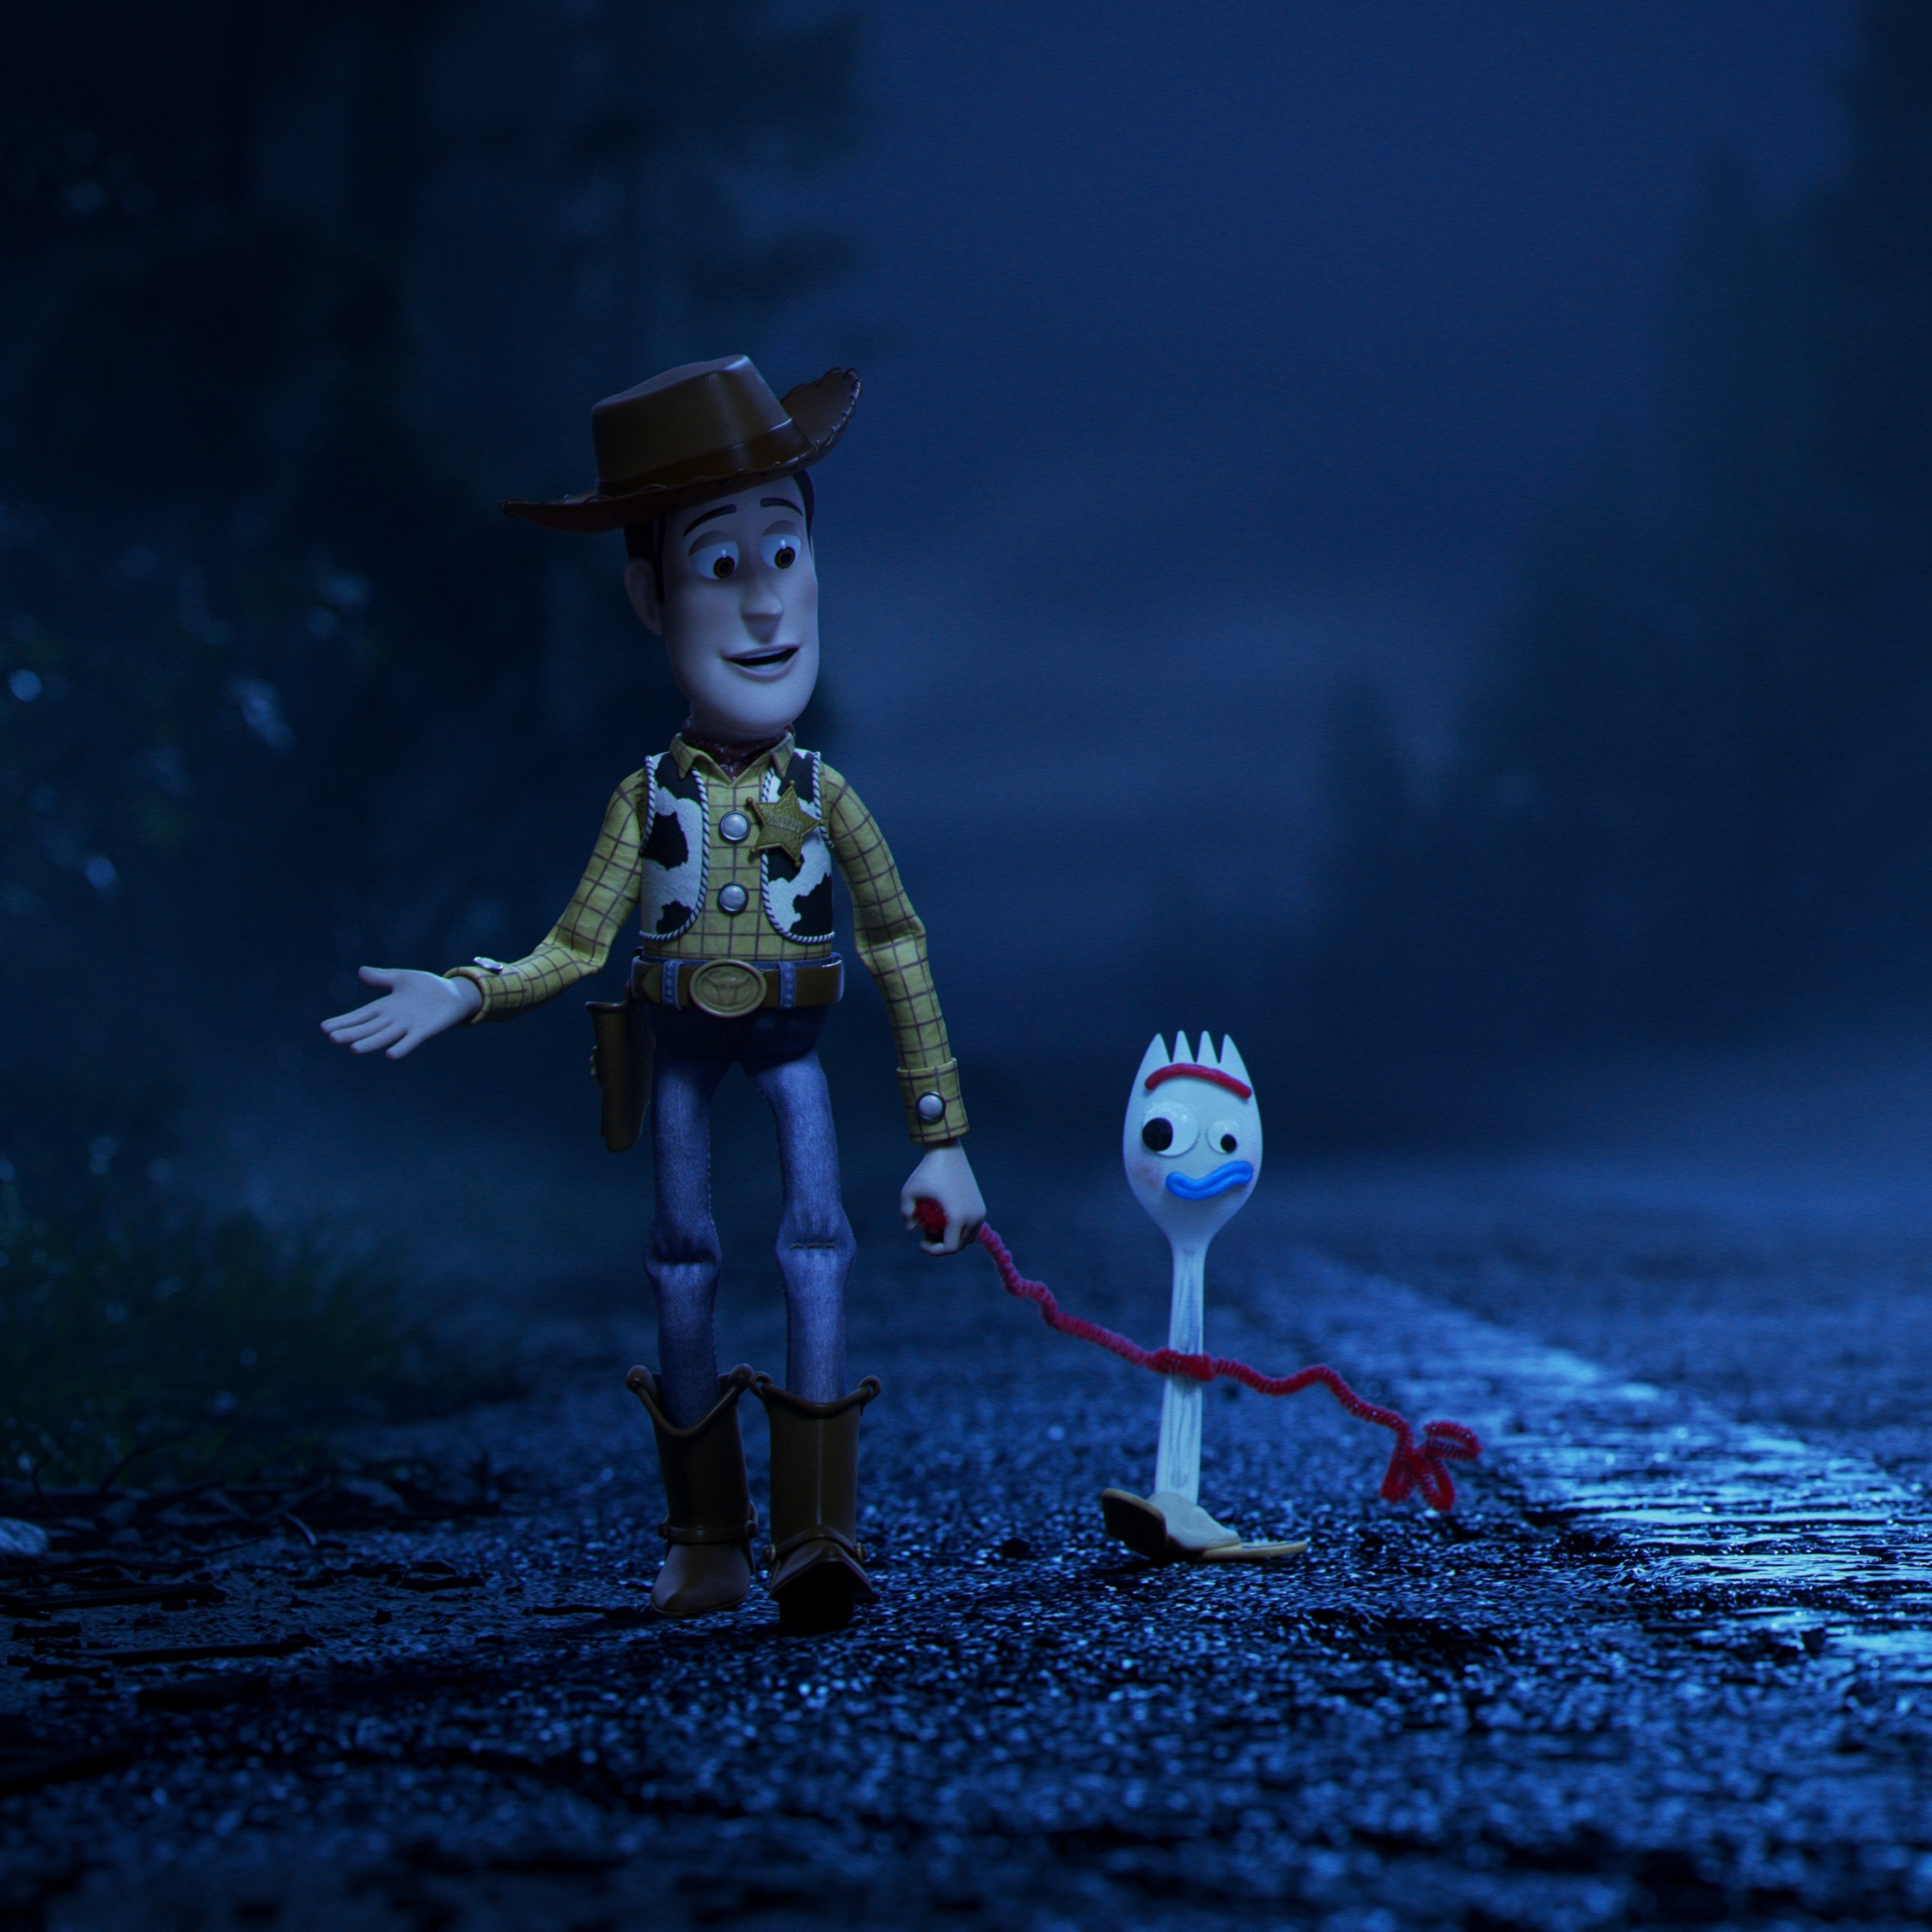 2019 Movie, Toy Story 4, Night Out, Walk, Wallpaper - Toy Story 4 Woody And Forky - HD Wallpaper 